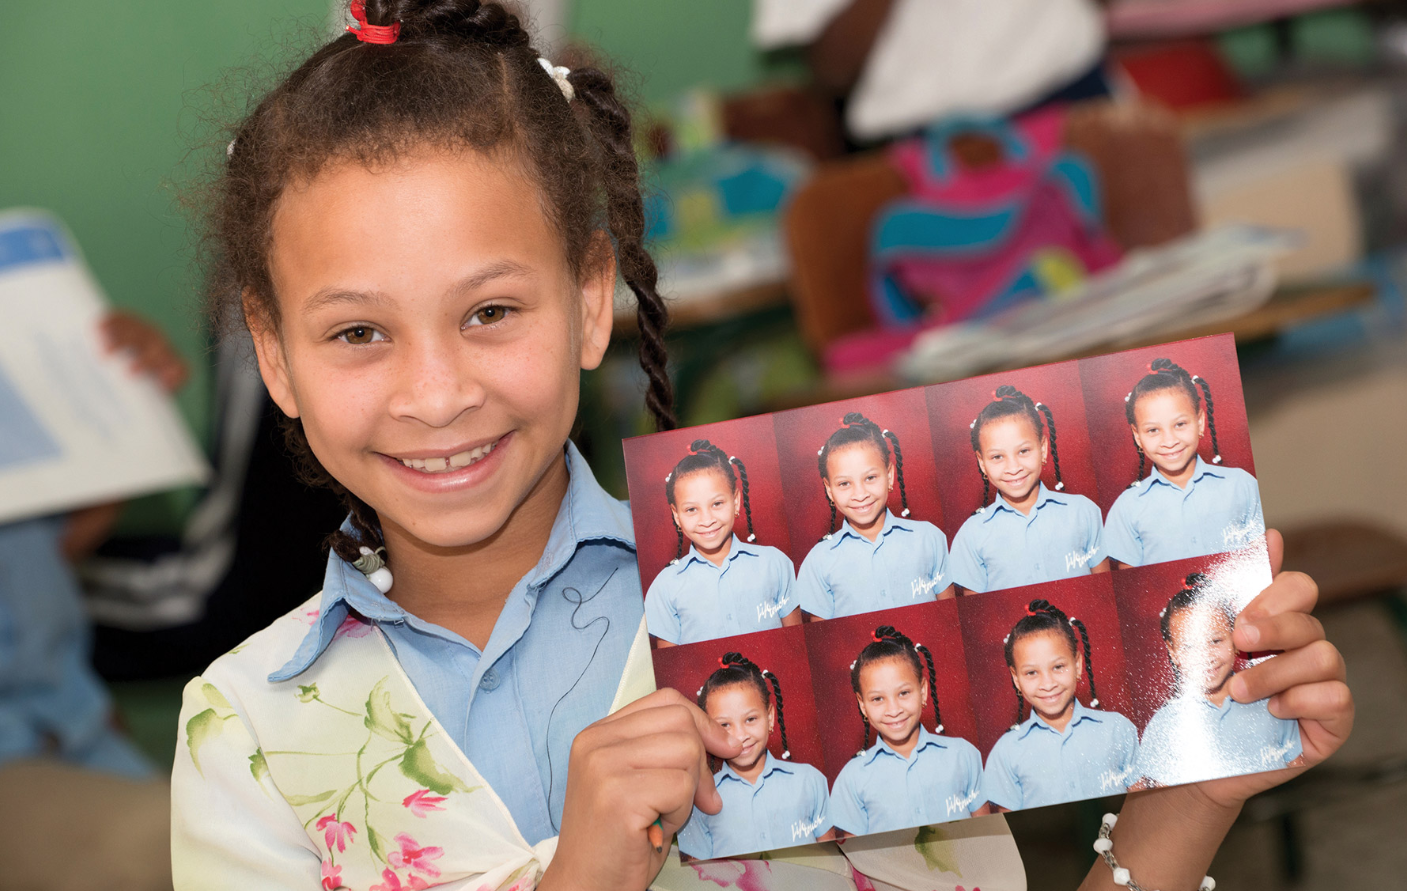 Memory Mission Program - Little girl holding school images from memory mission